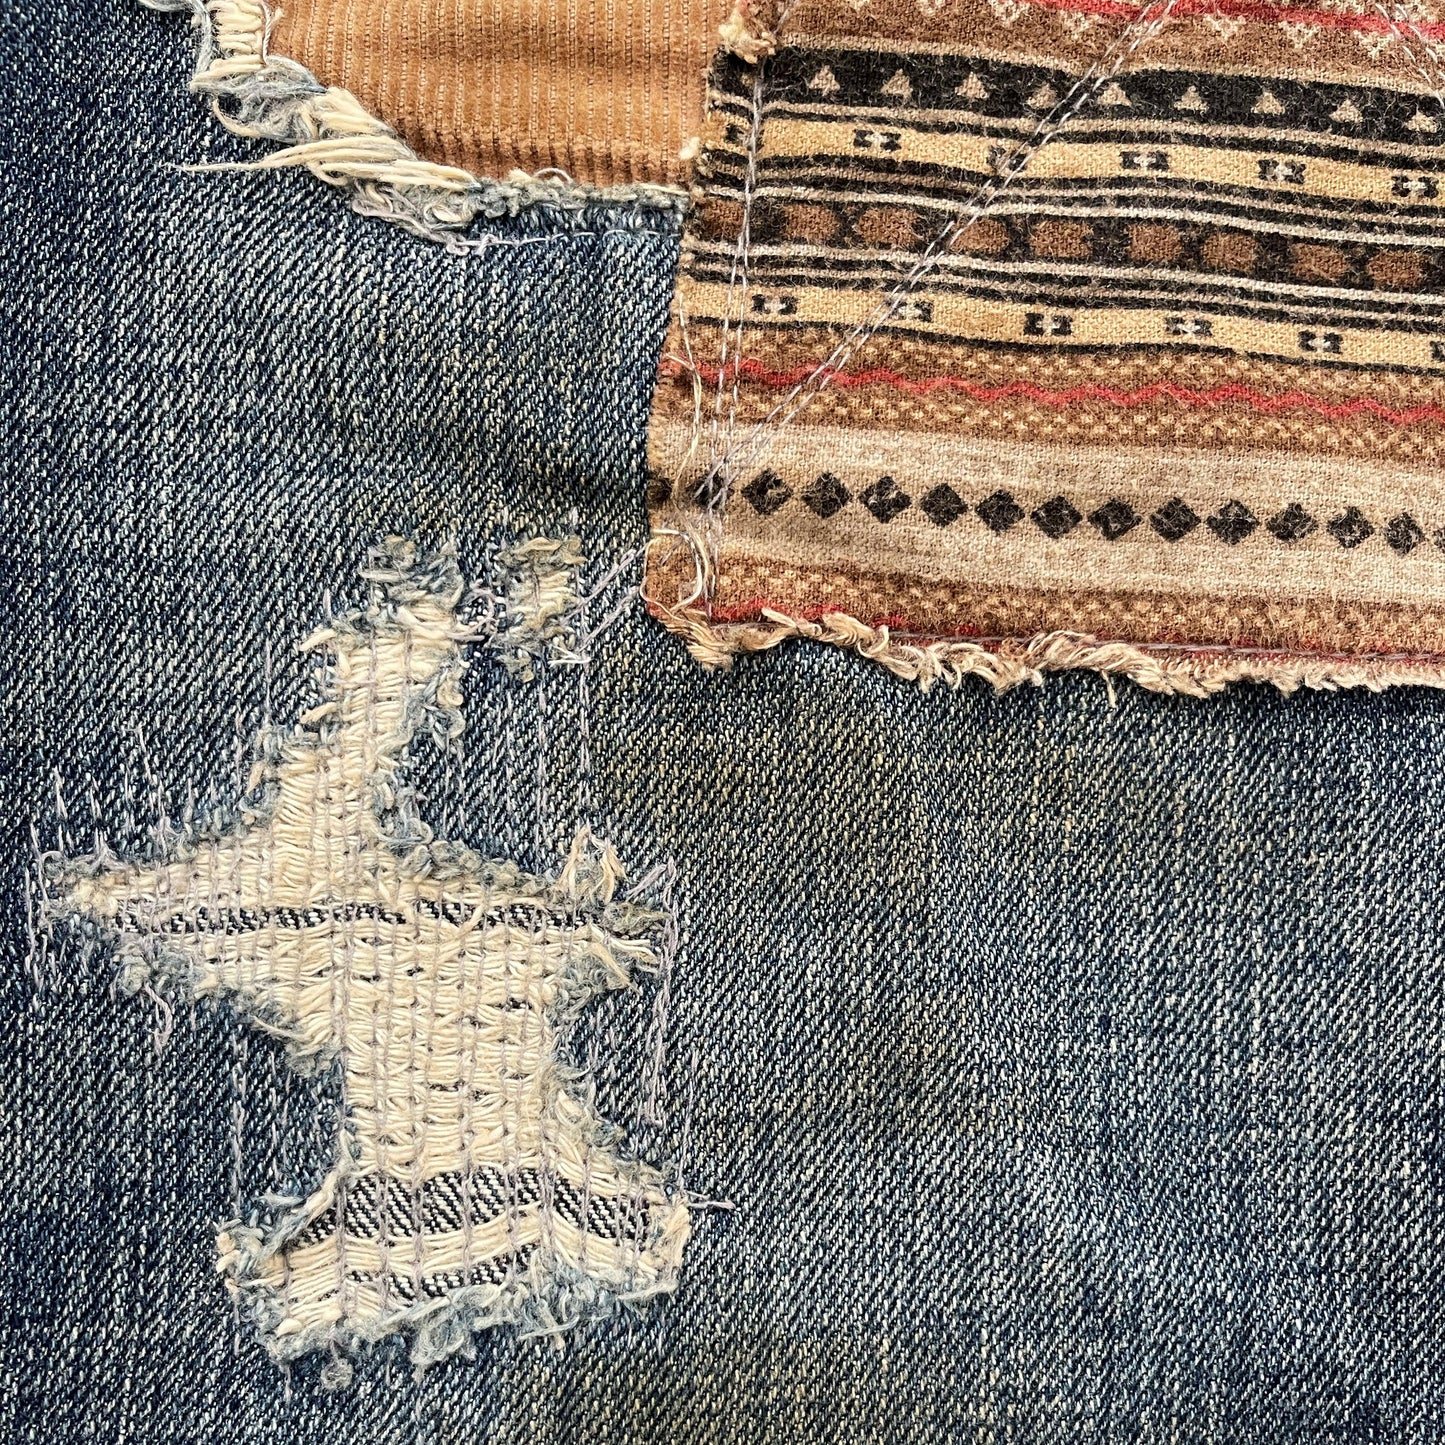 Japanese Muddy Boro Jeans - Known Source